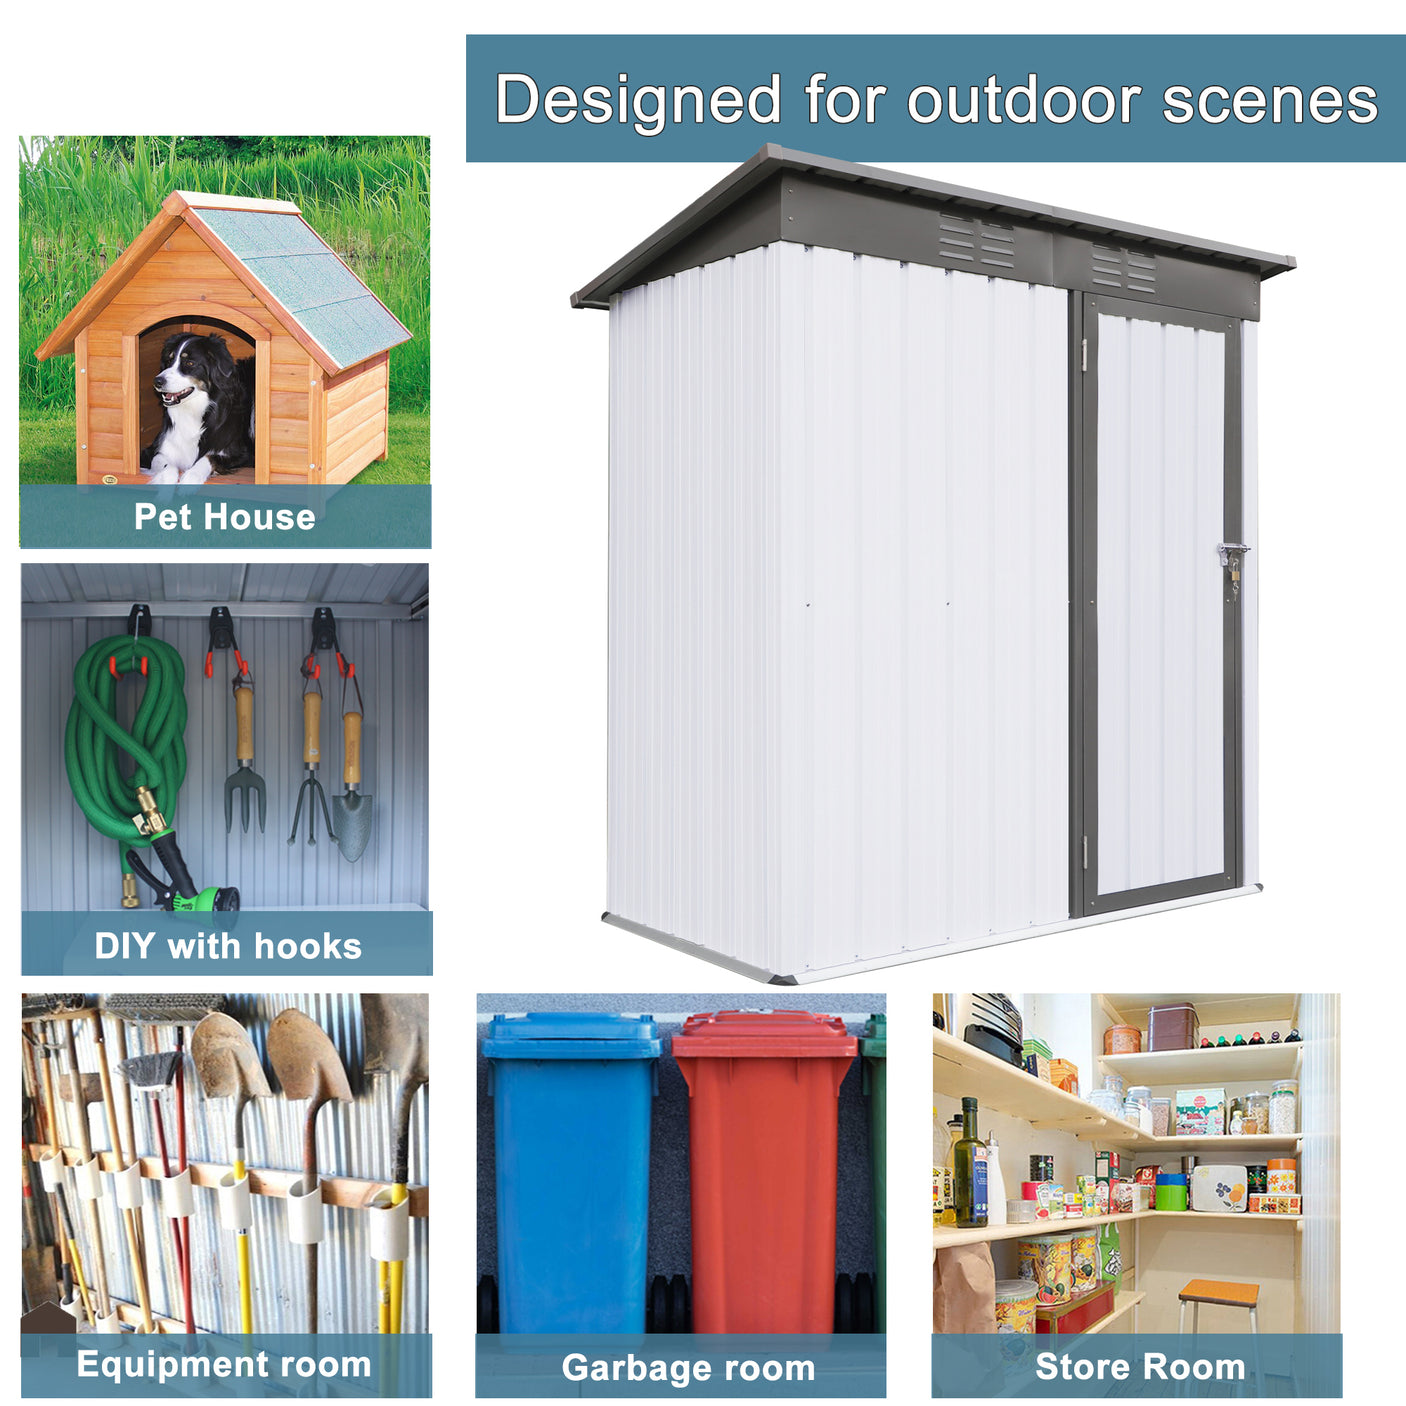 5 X 3 Ft Outdoor Storage Shed, Galvanized Metal Garden Shed With Lockable Doors, Tool Storage Shed For Patio Lawn Backyard Trash Cans